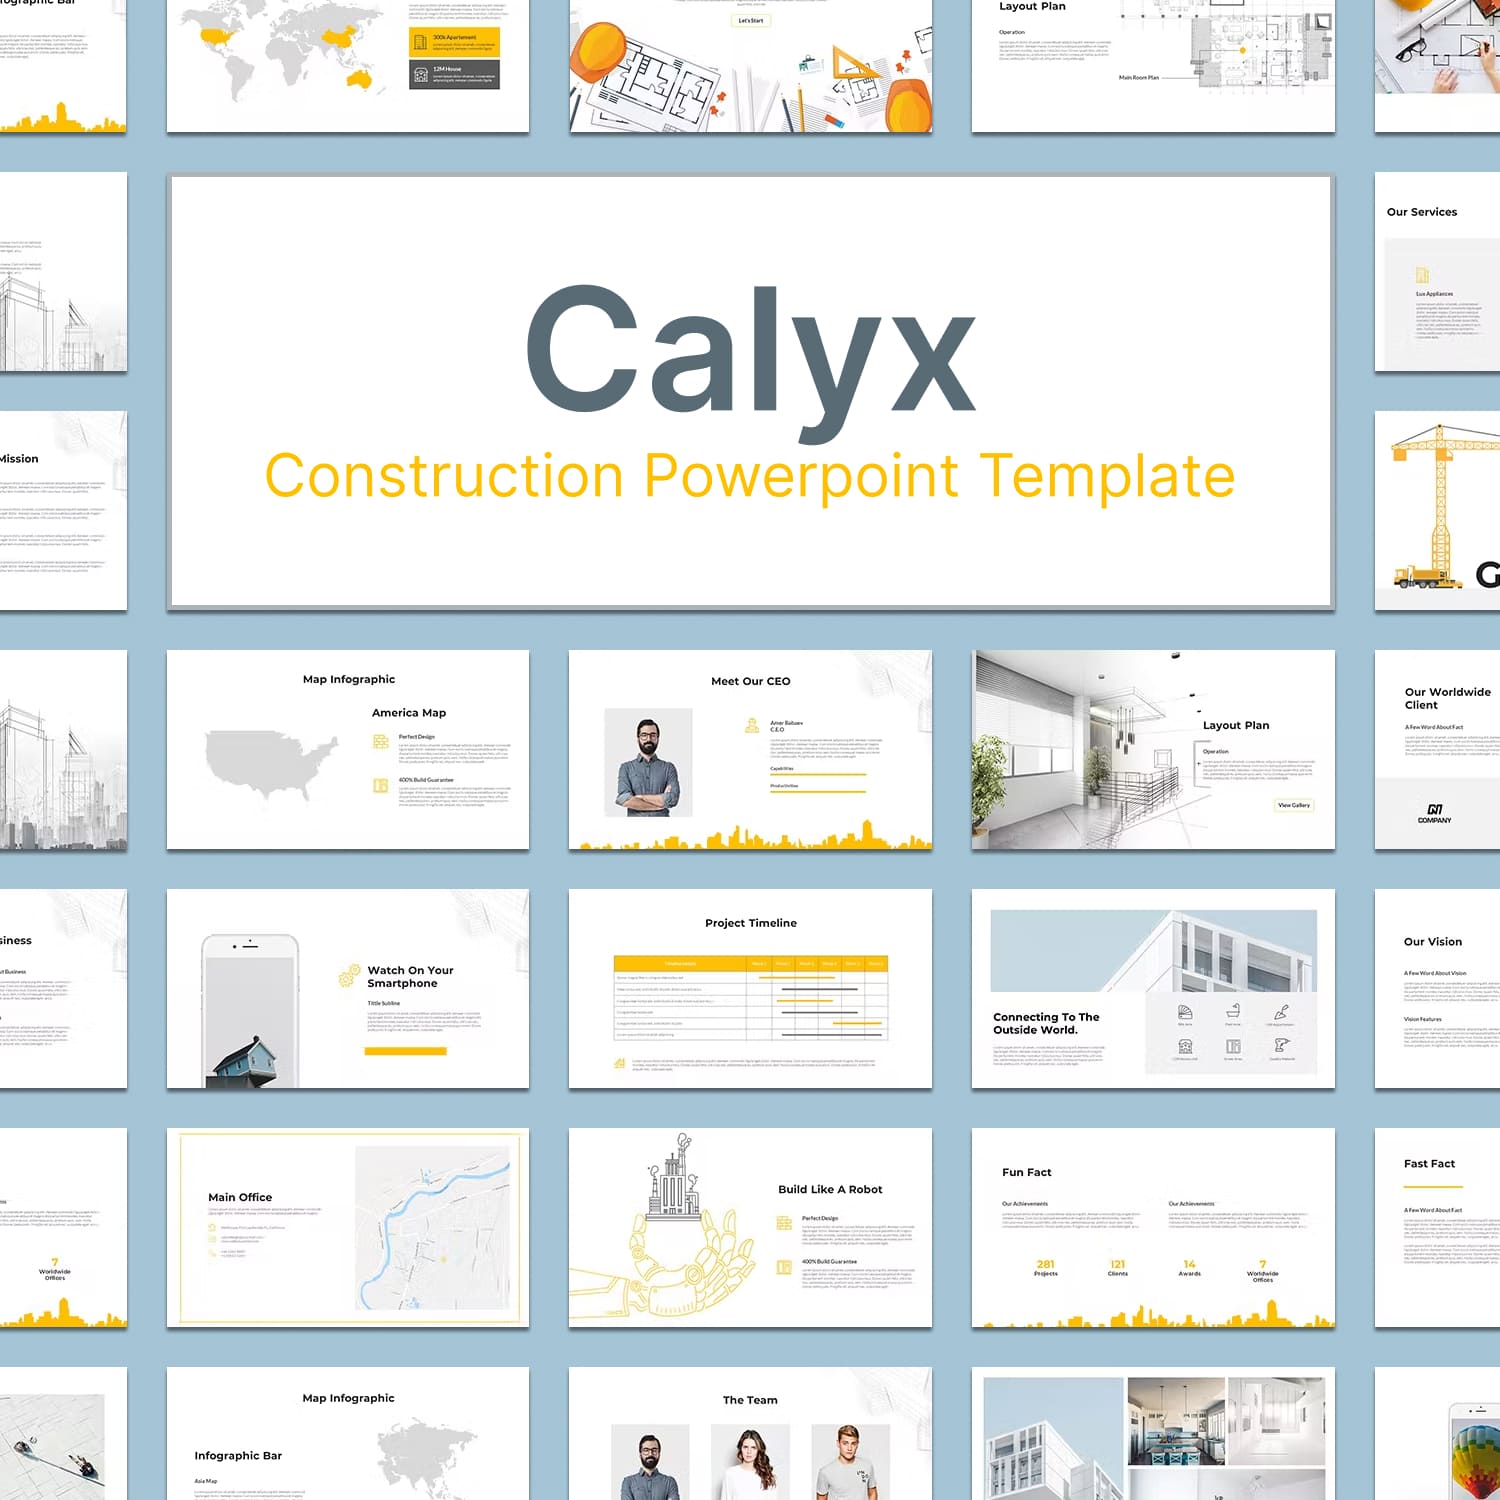 Calyx construction powerpoint template - main image preview.